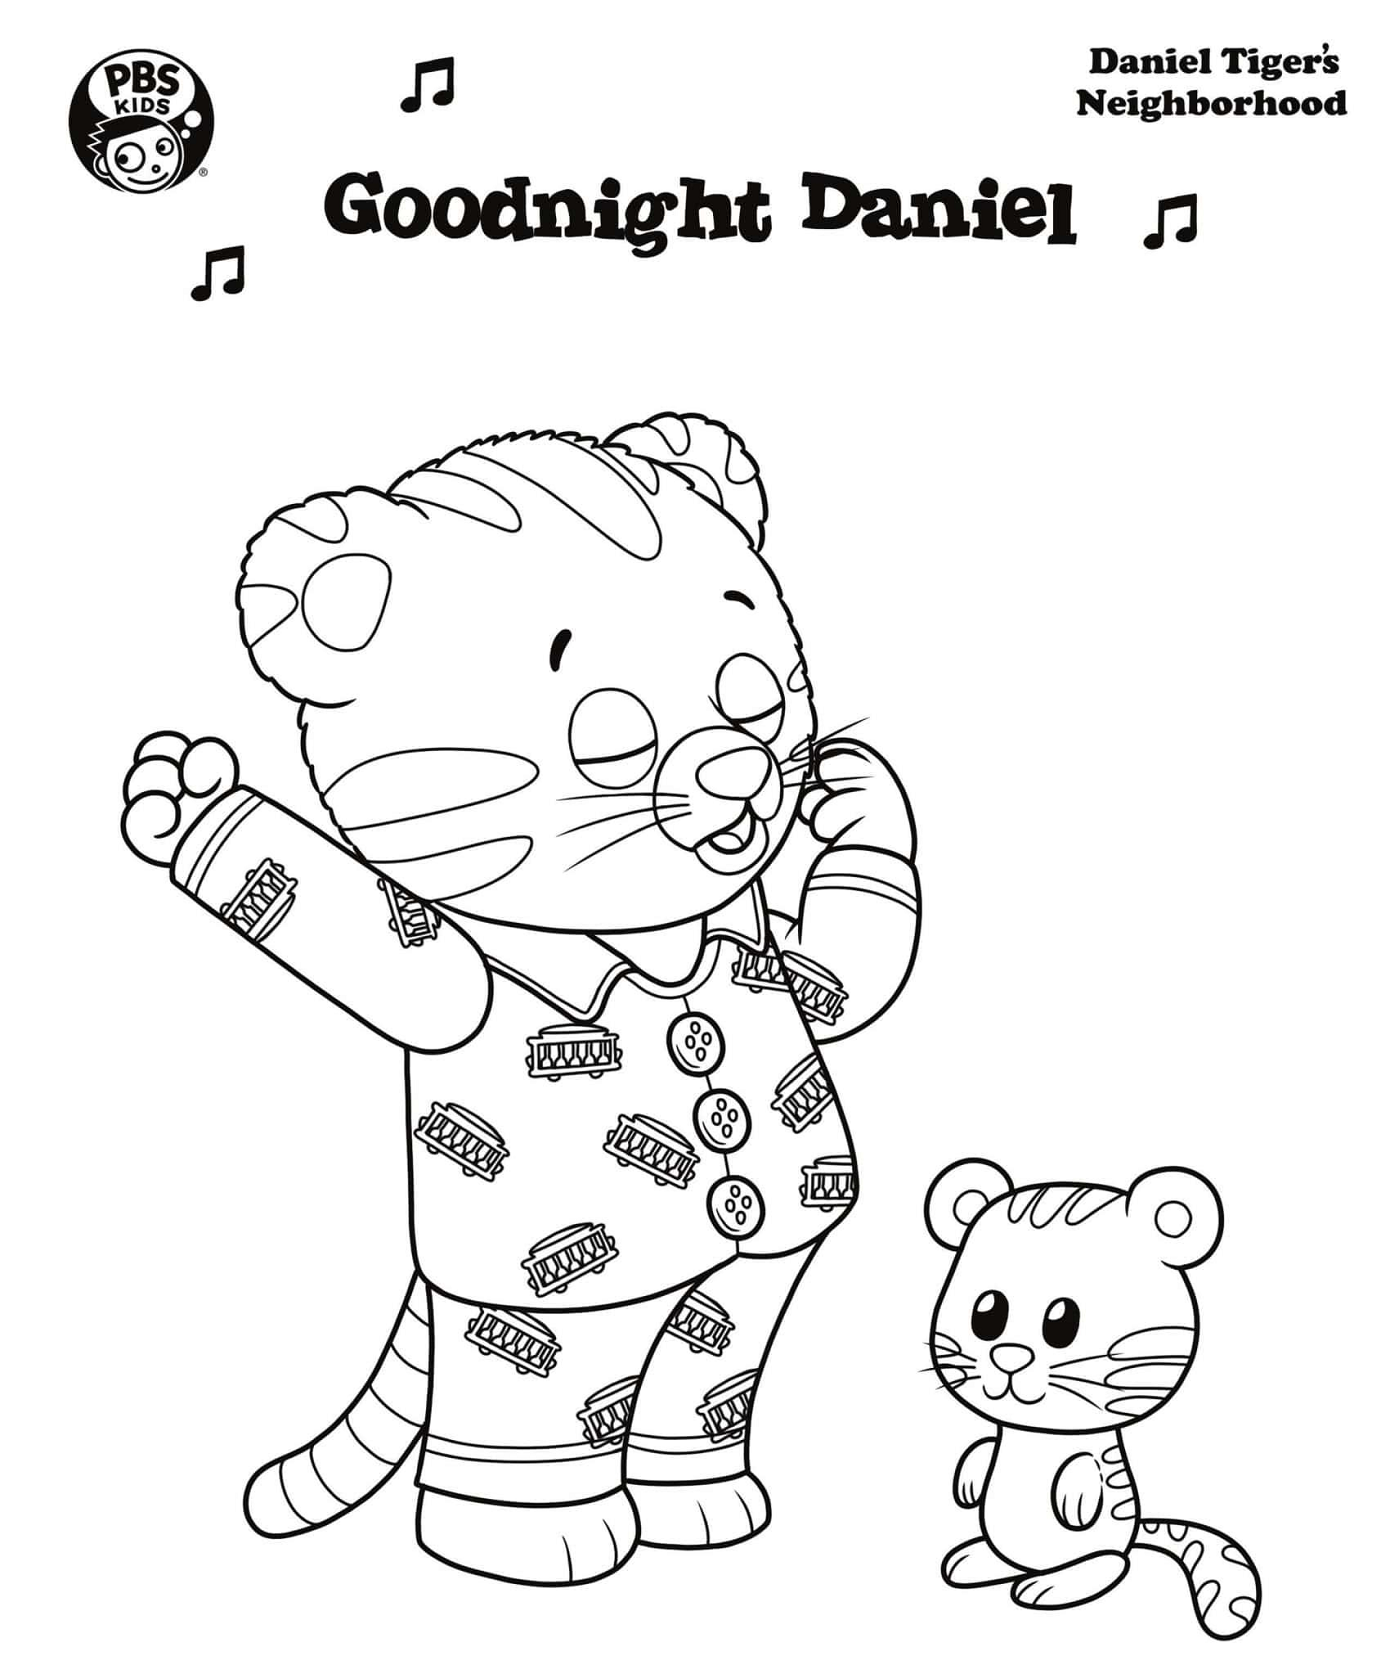 Goodnight Daniel Tiger Coloring Page